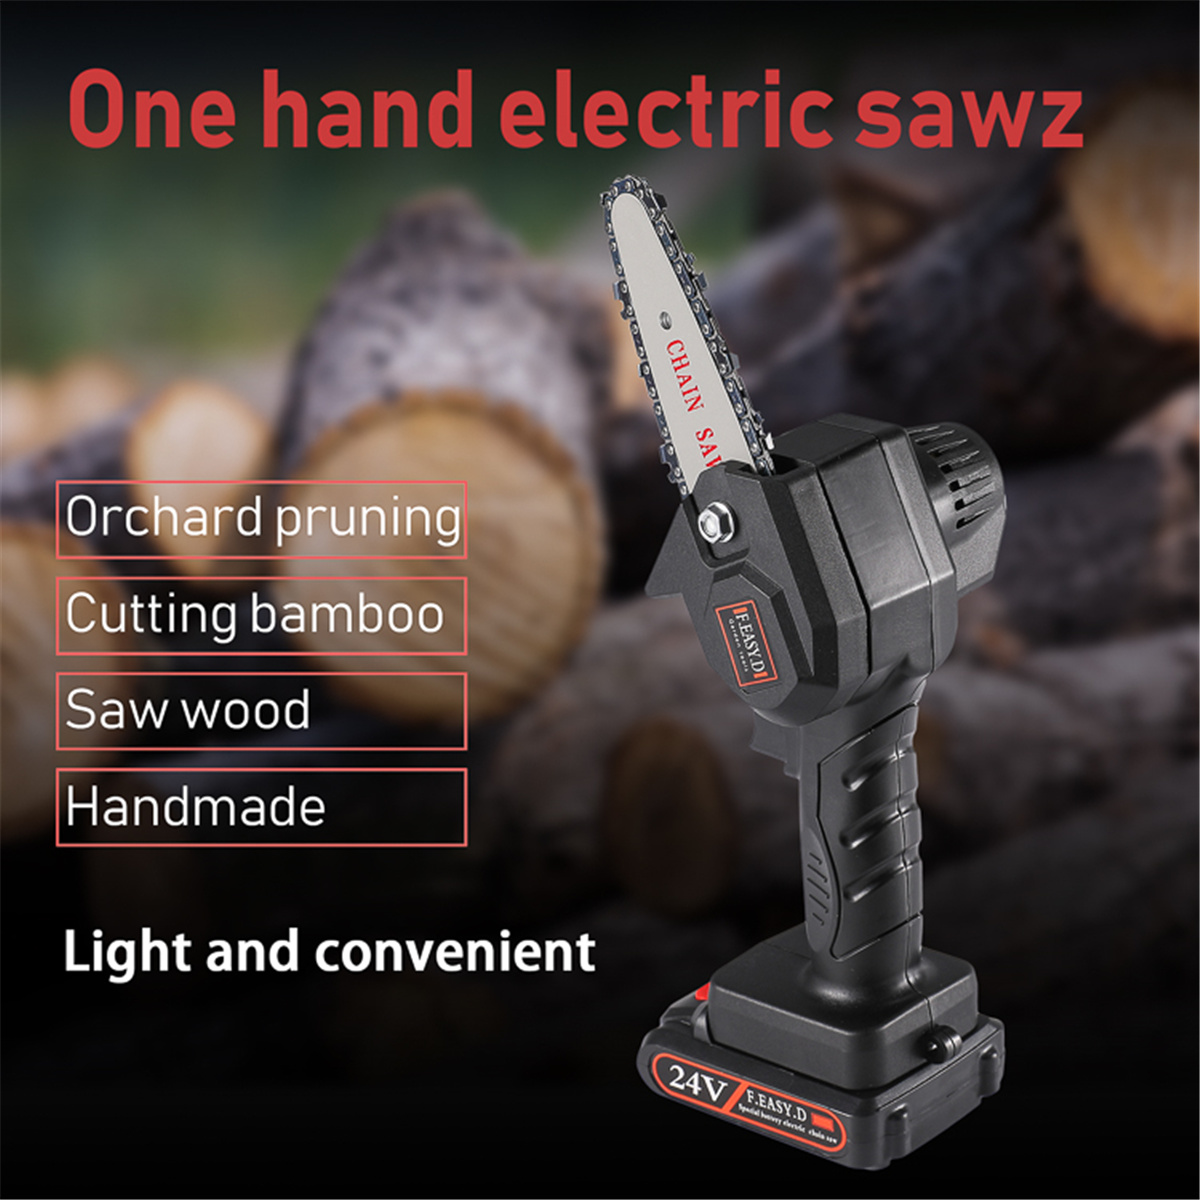 Portable Mini Chainsaw, 4 Inch Cordless Electric Protable Chainsaw with Brushless Motor, 24V Electric Hand Chainsaw, One-Hand Lightweight Chainsaw, Great for Tree Branch Wood Cutting - image 6 of 7